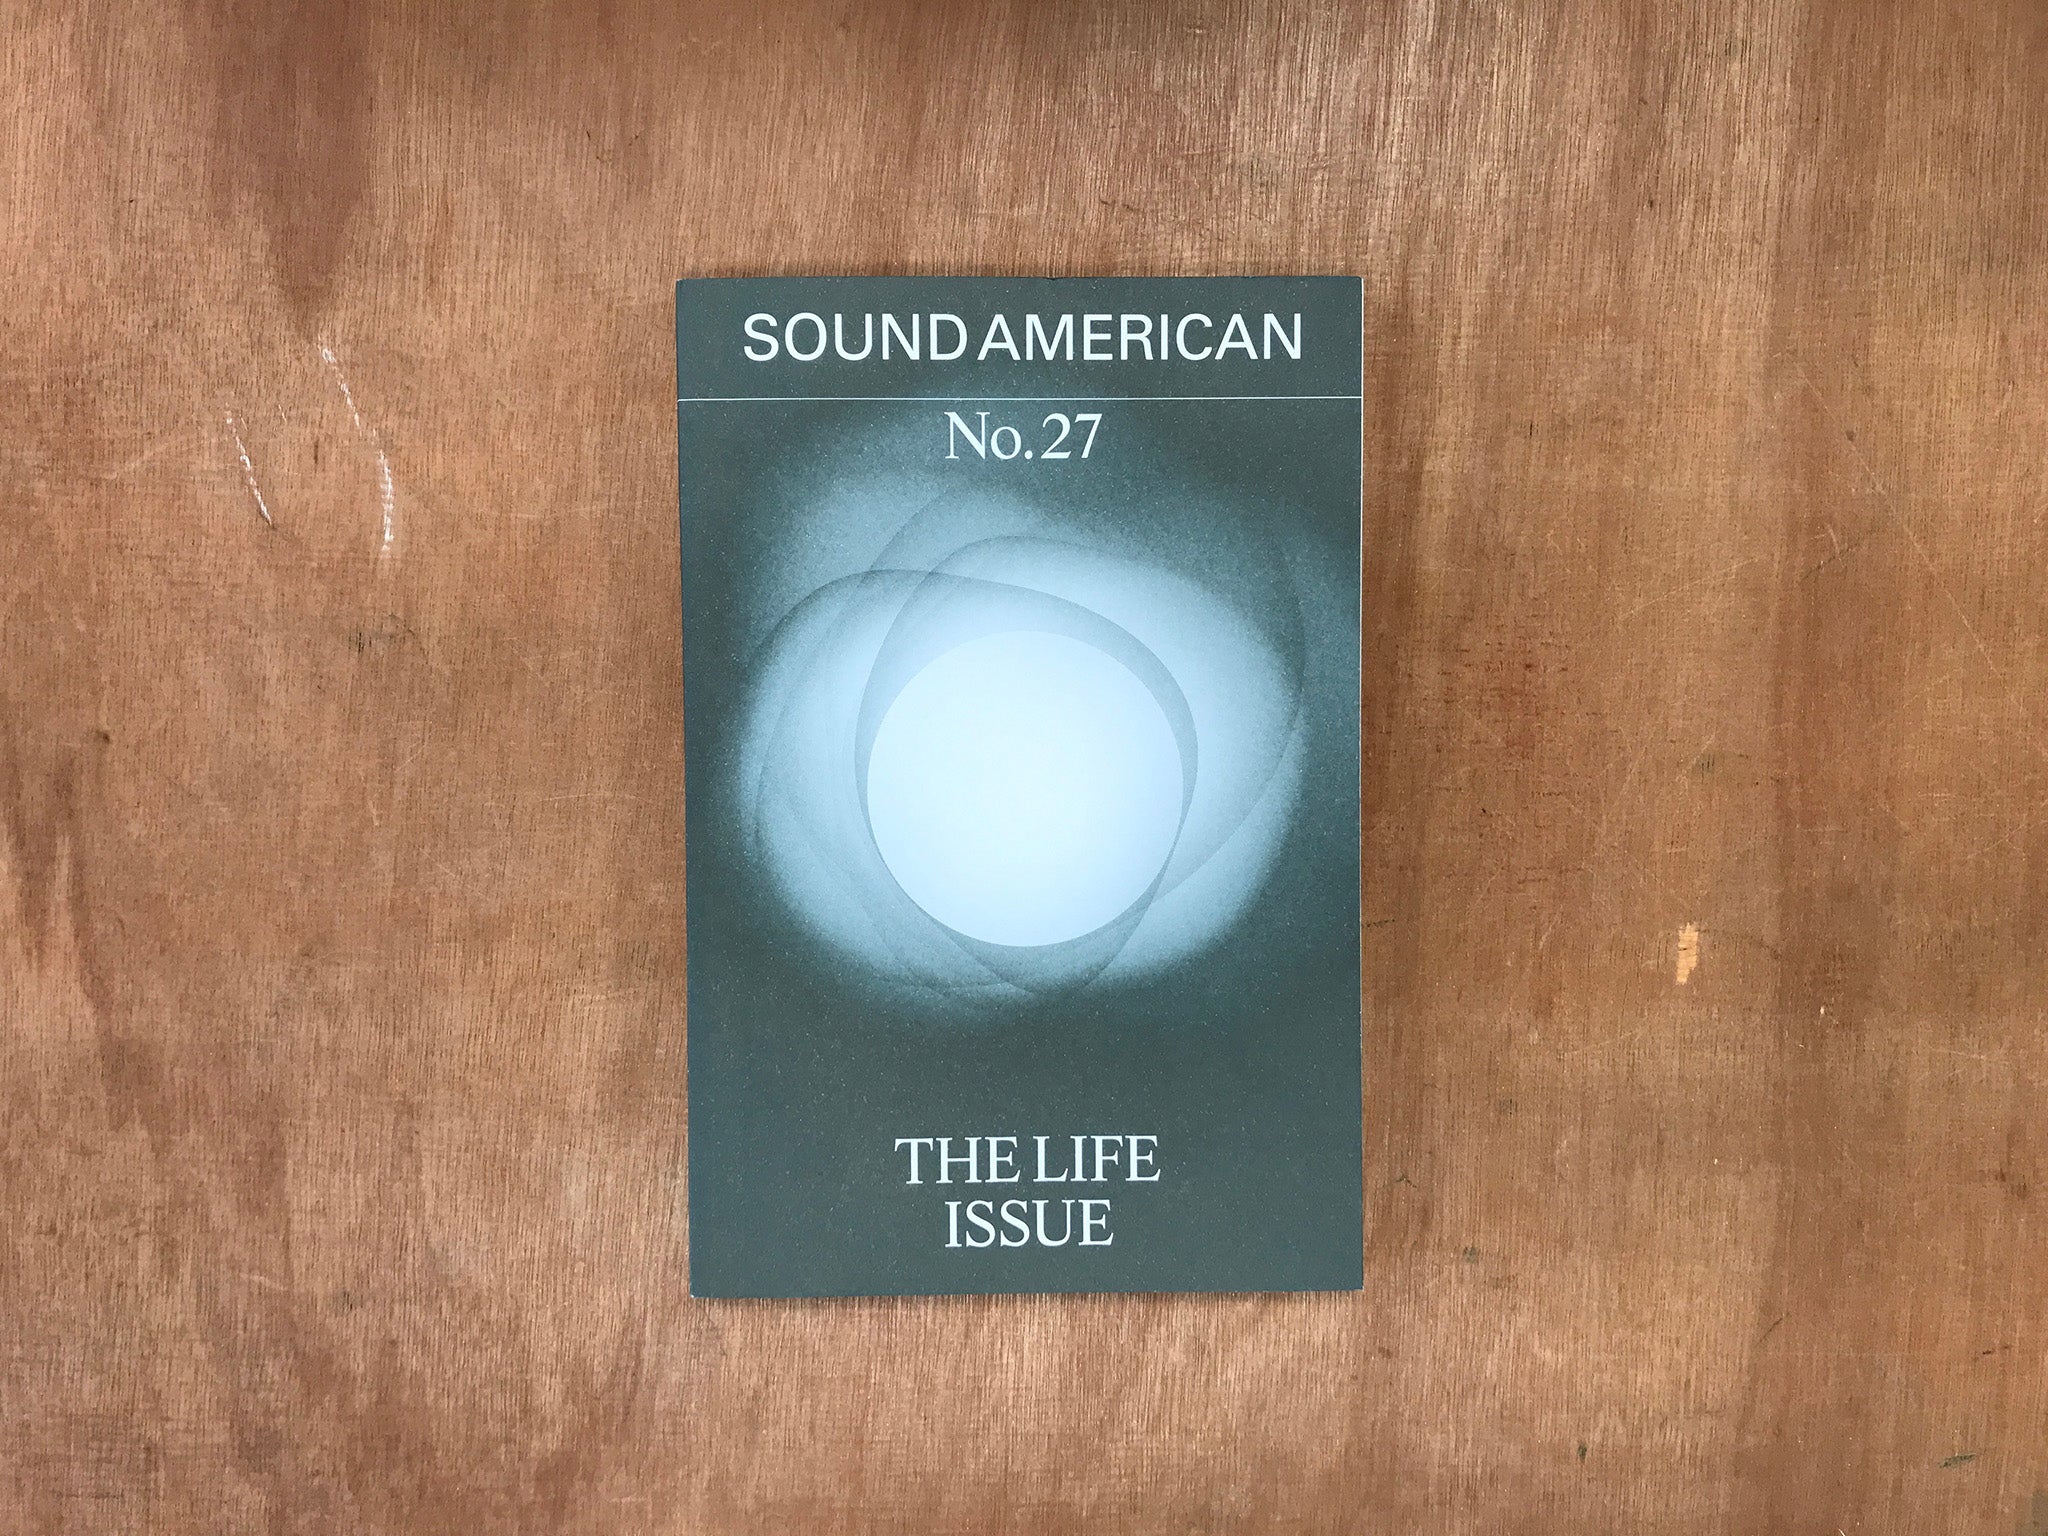 SOUND AMERICAN #27 – THE LIFE ISSUE